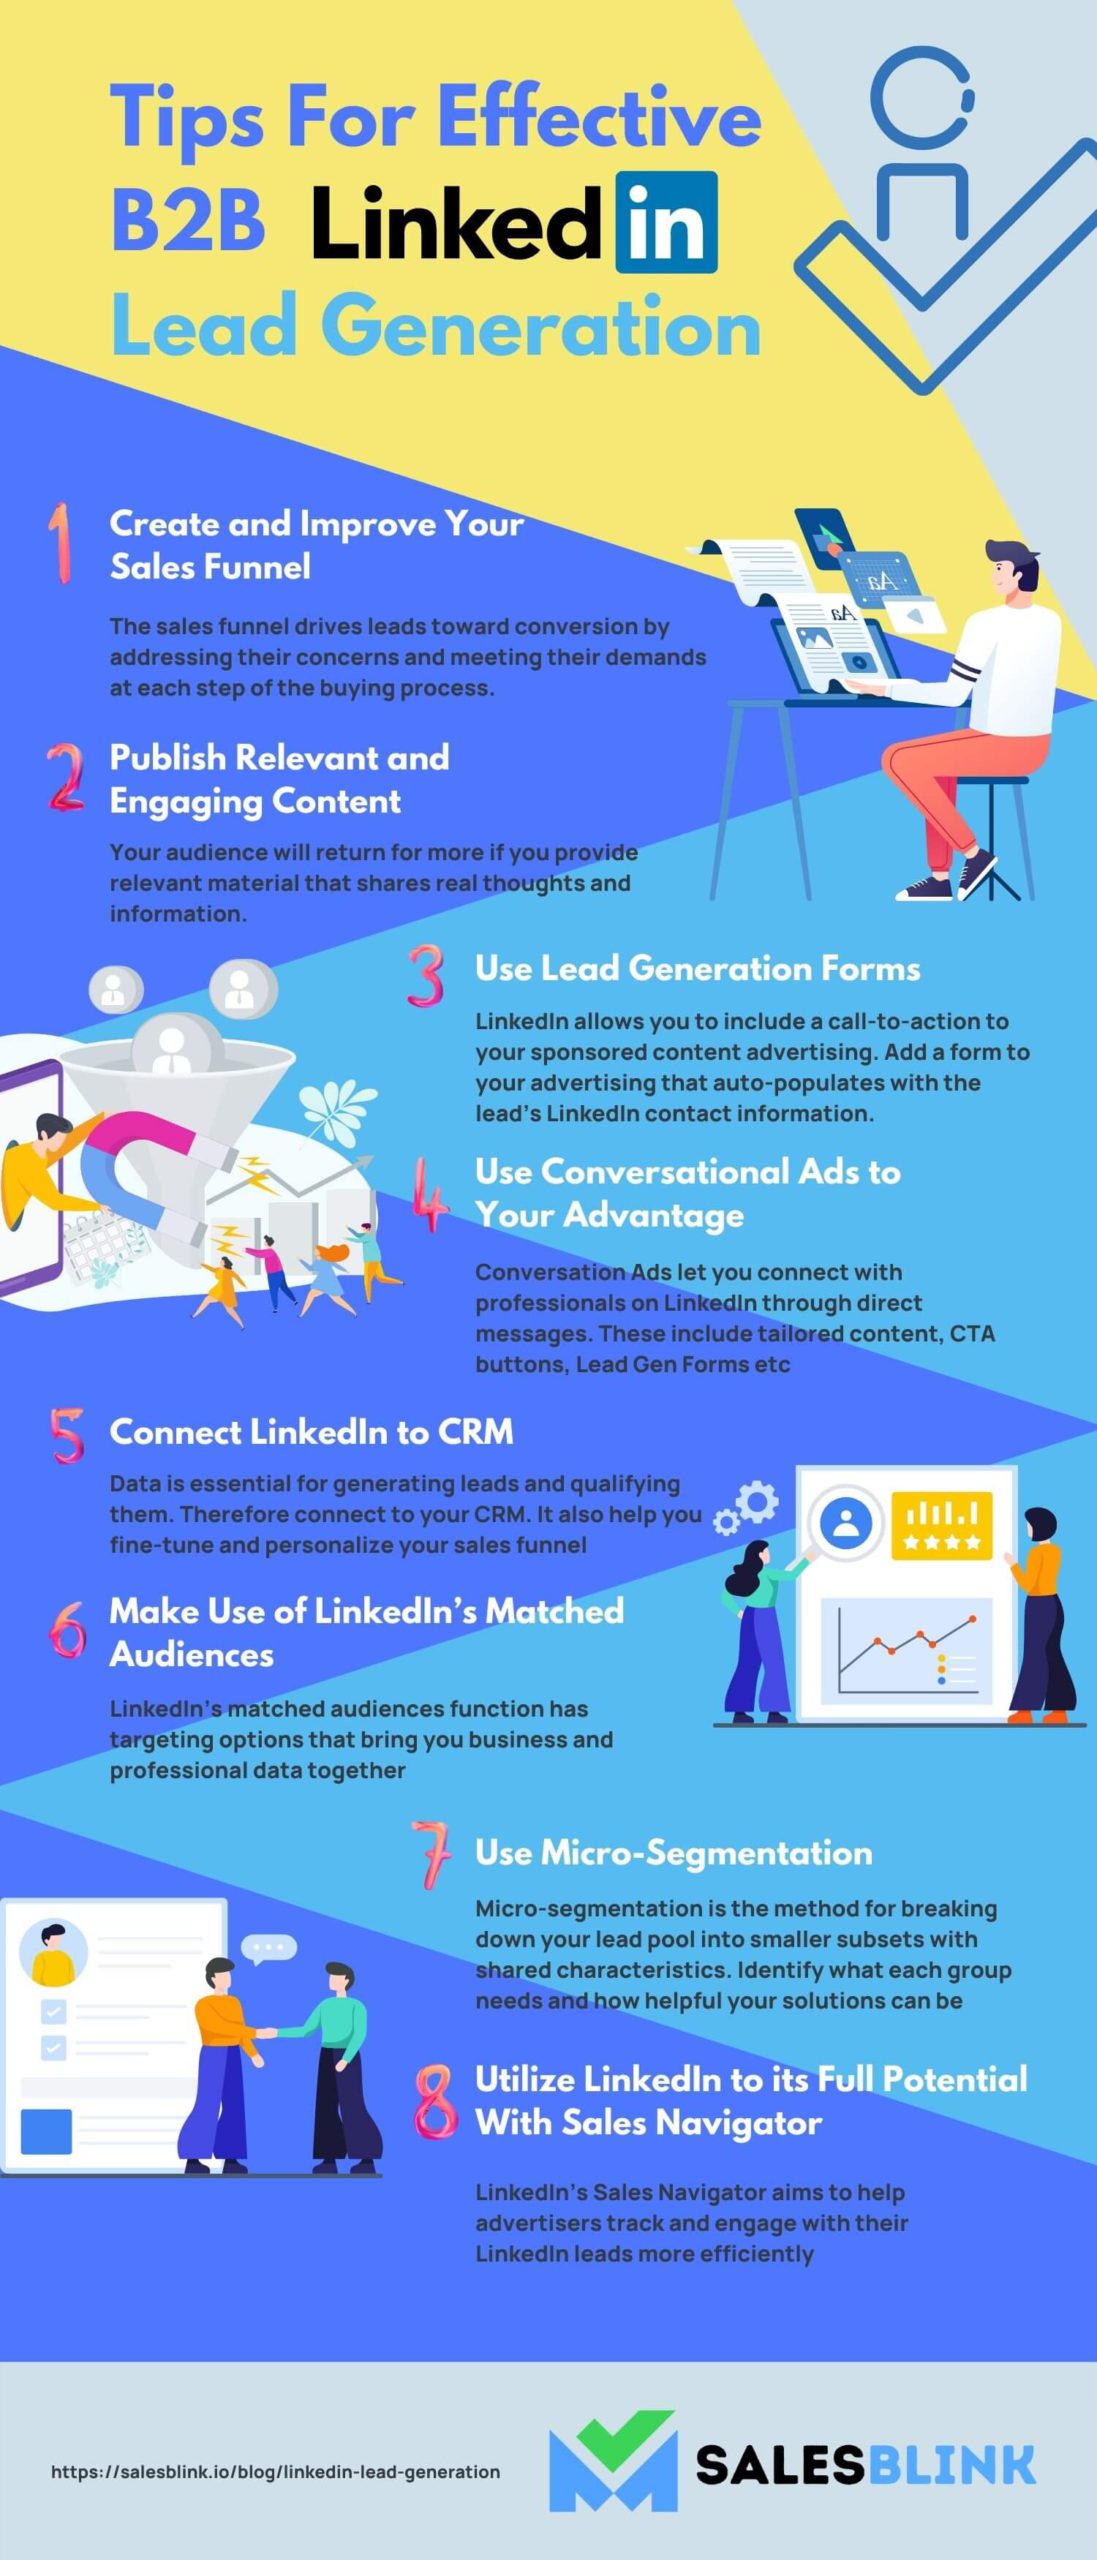 Tips For Effective B2B LinkedIn Lead Generation - Infographic 